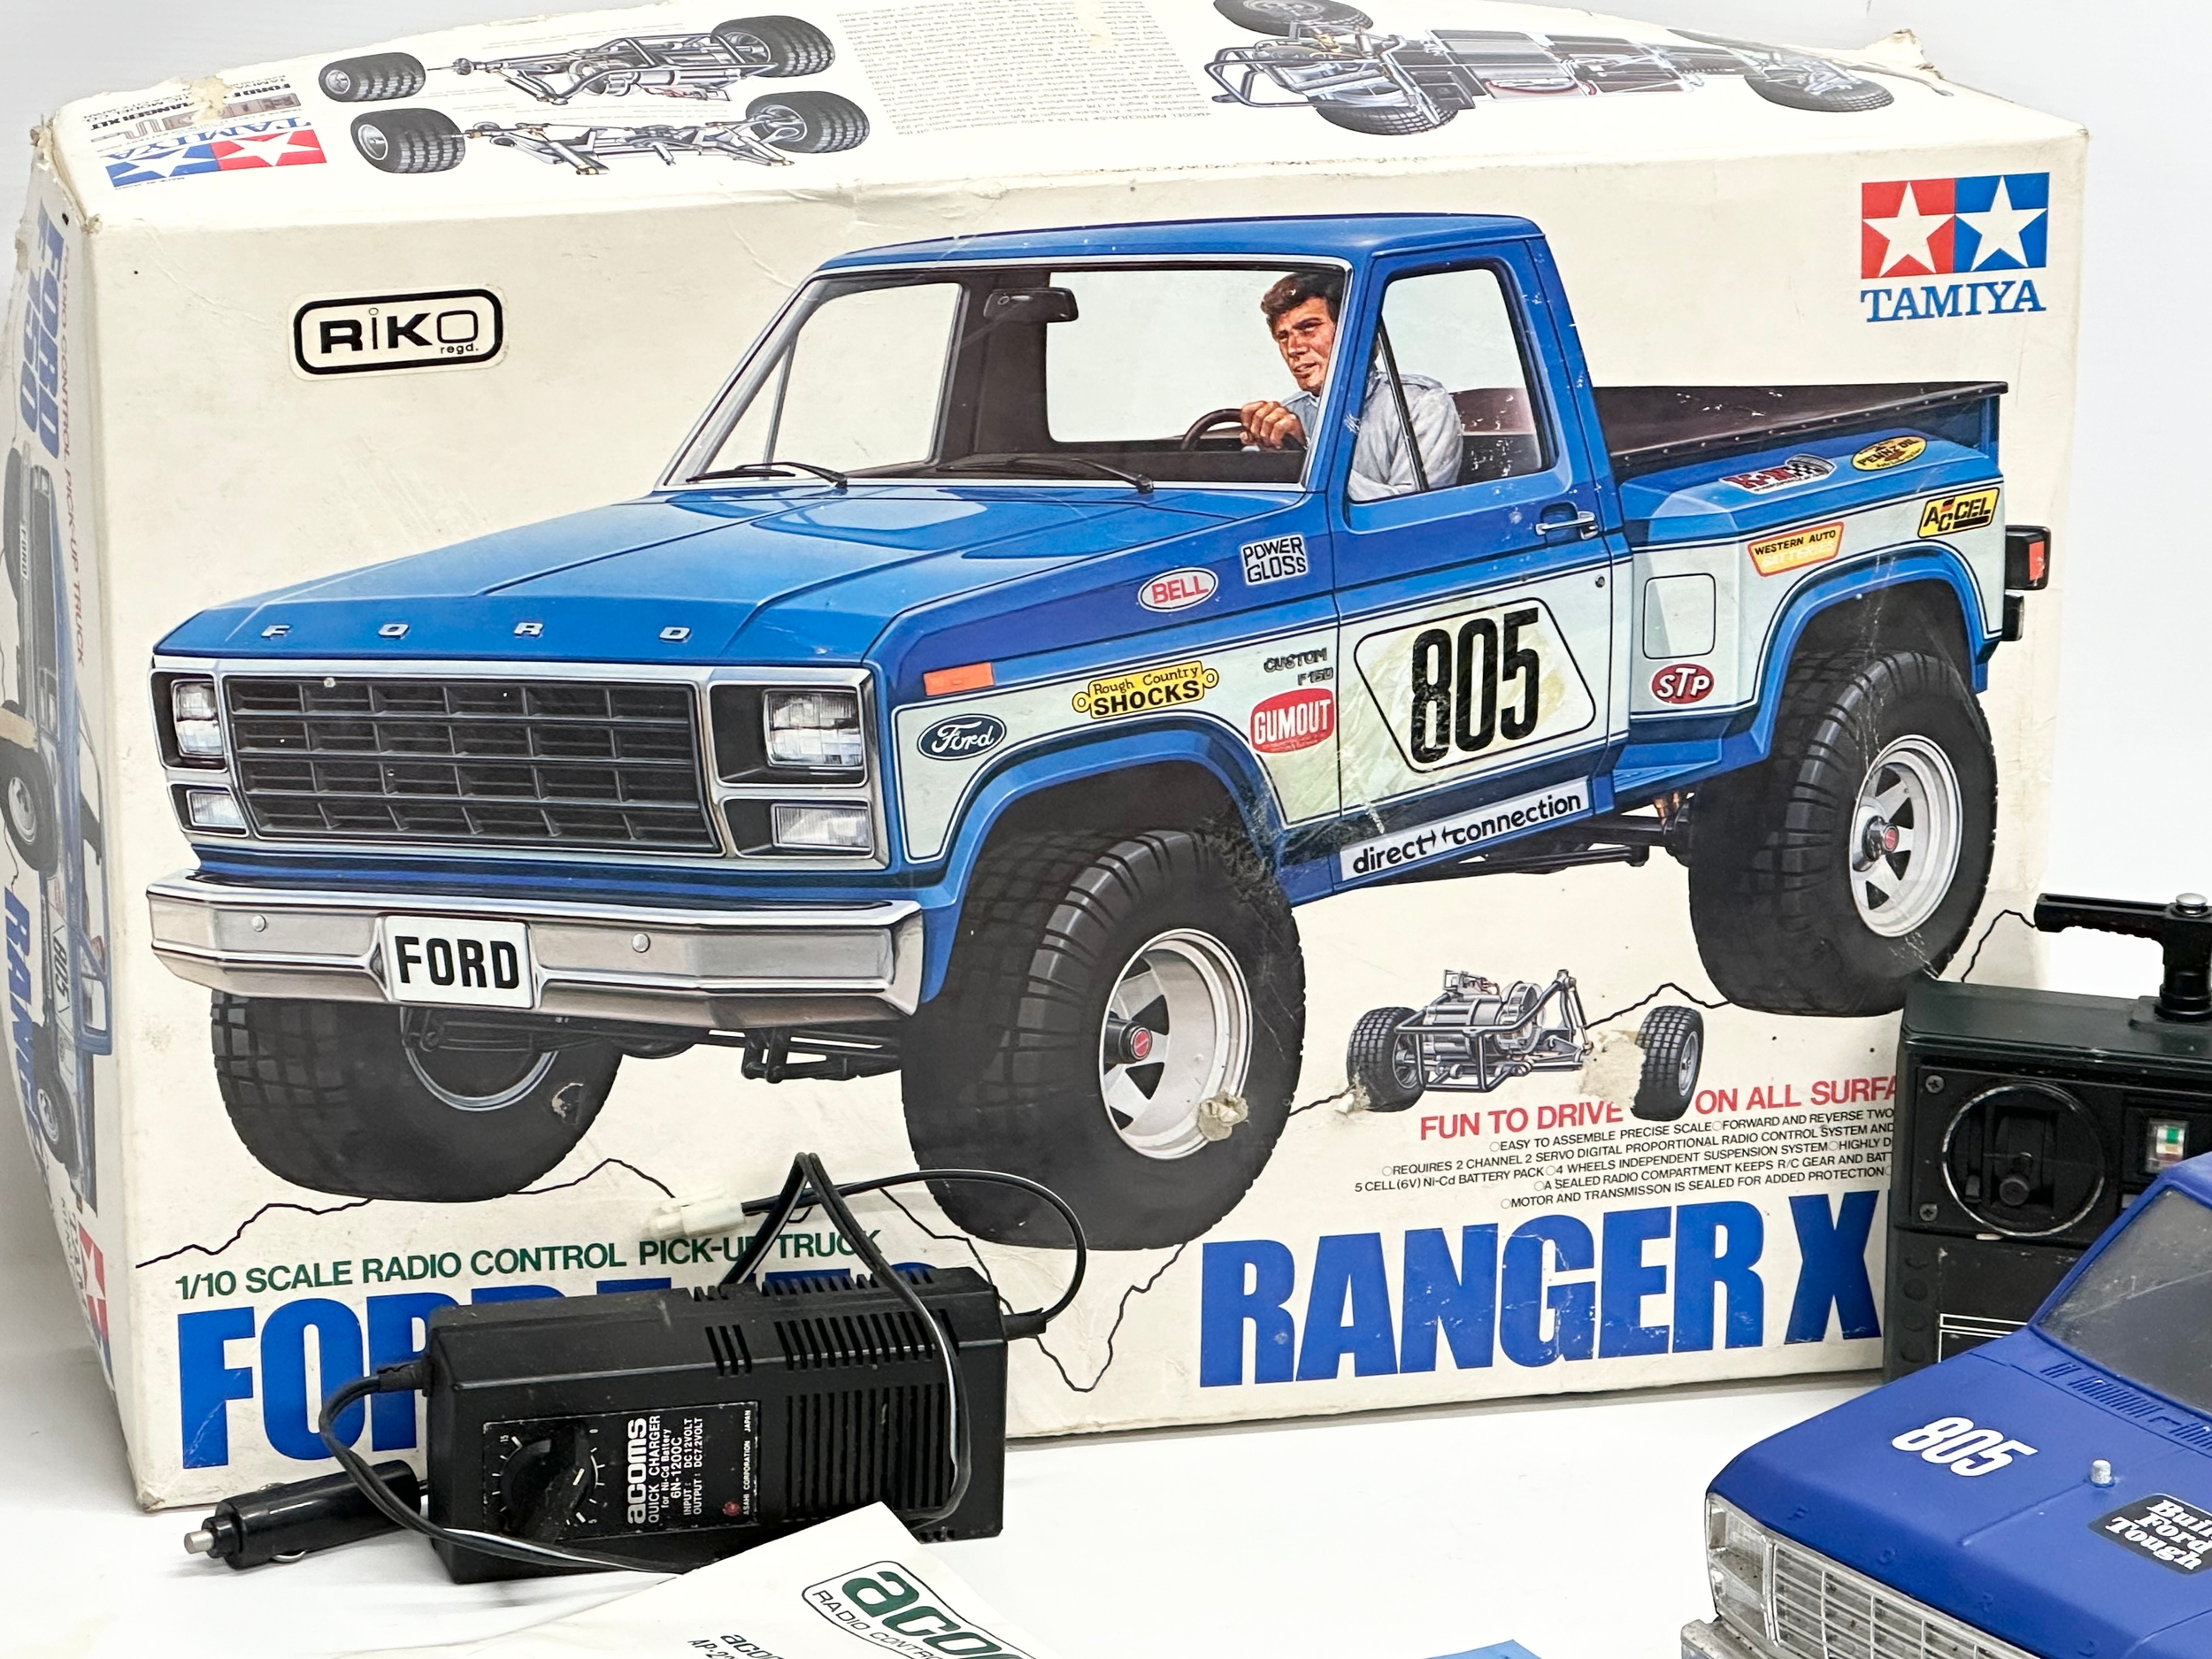 A Tamiya Riko Ford F 150 Ranger XLT radio control pick up truck with box. 1/10 scale. Remote and - Image 6 of 6